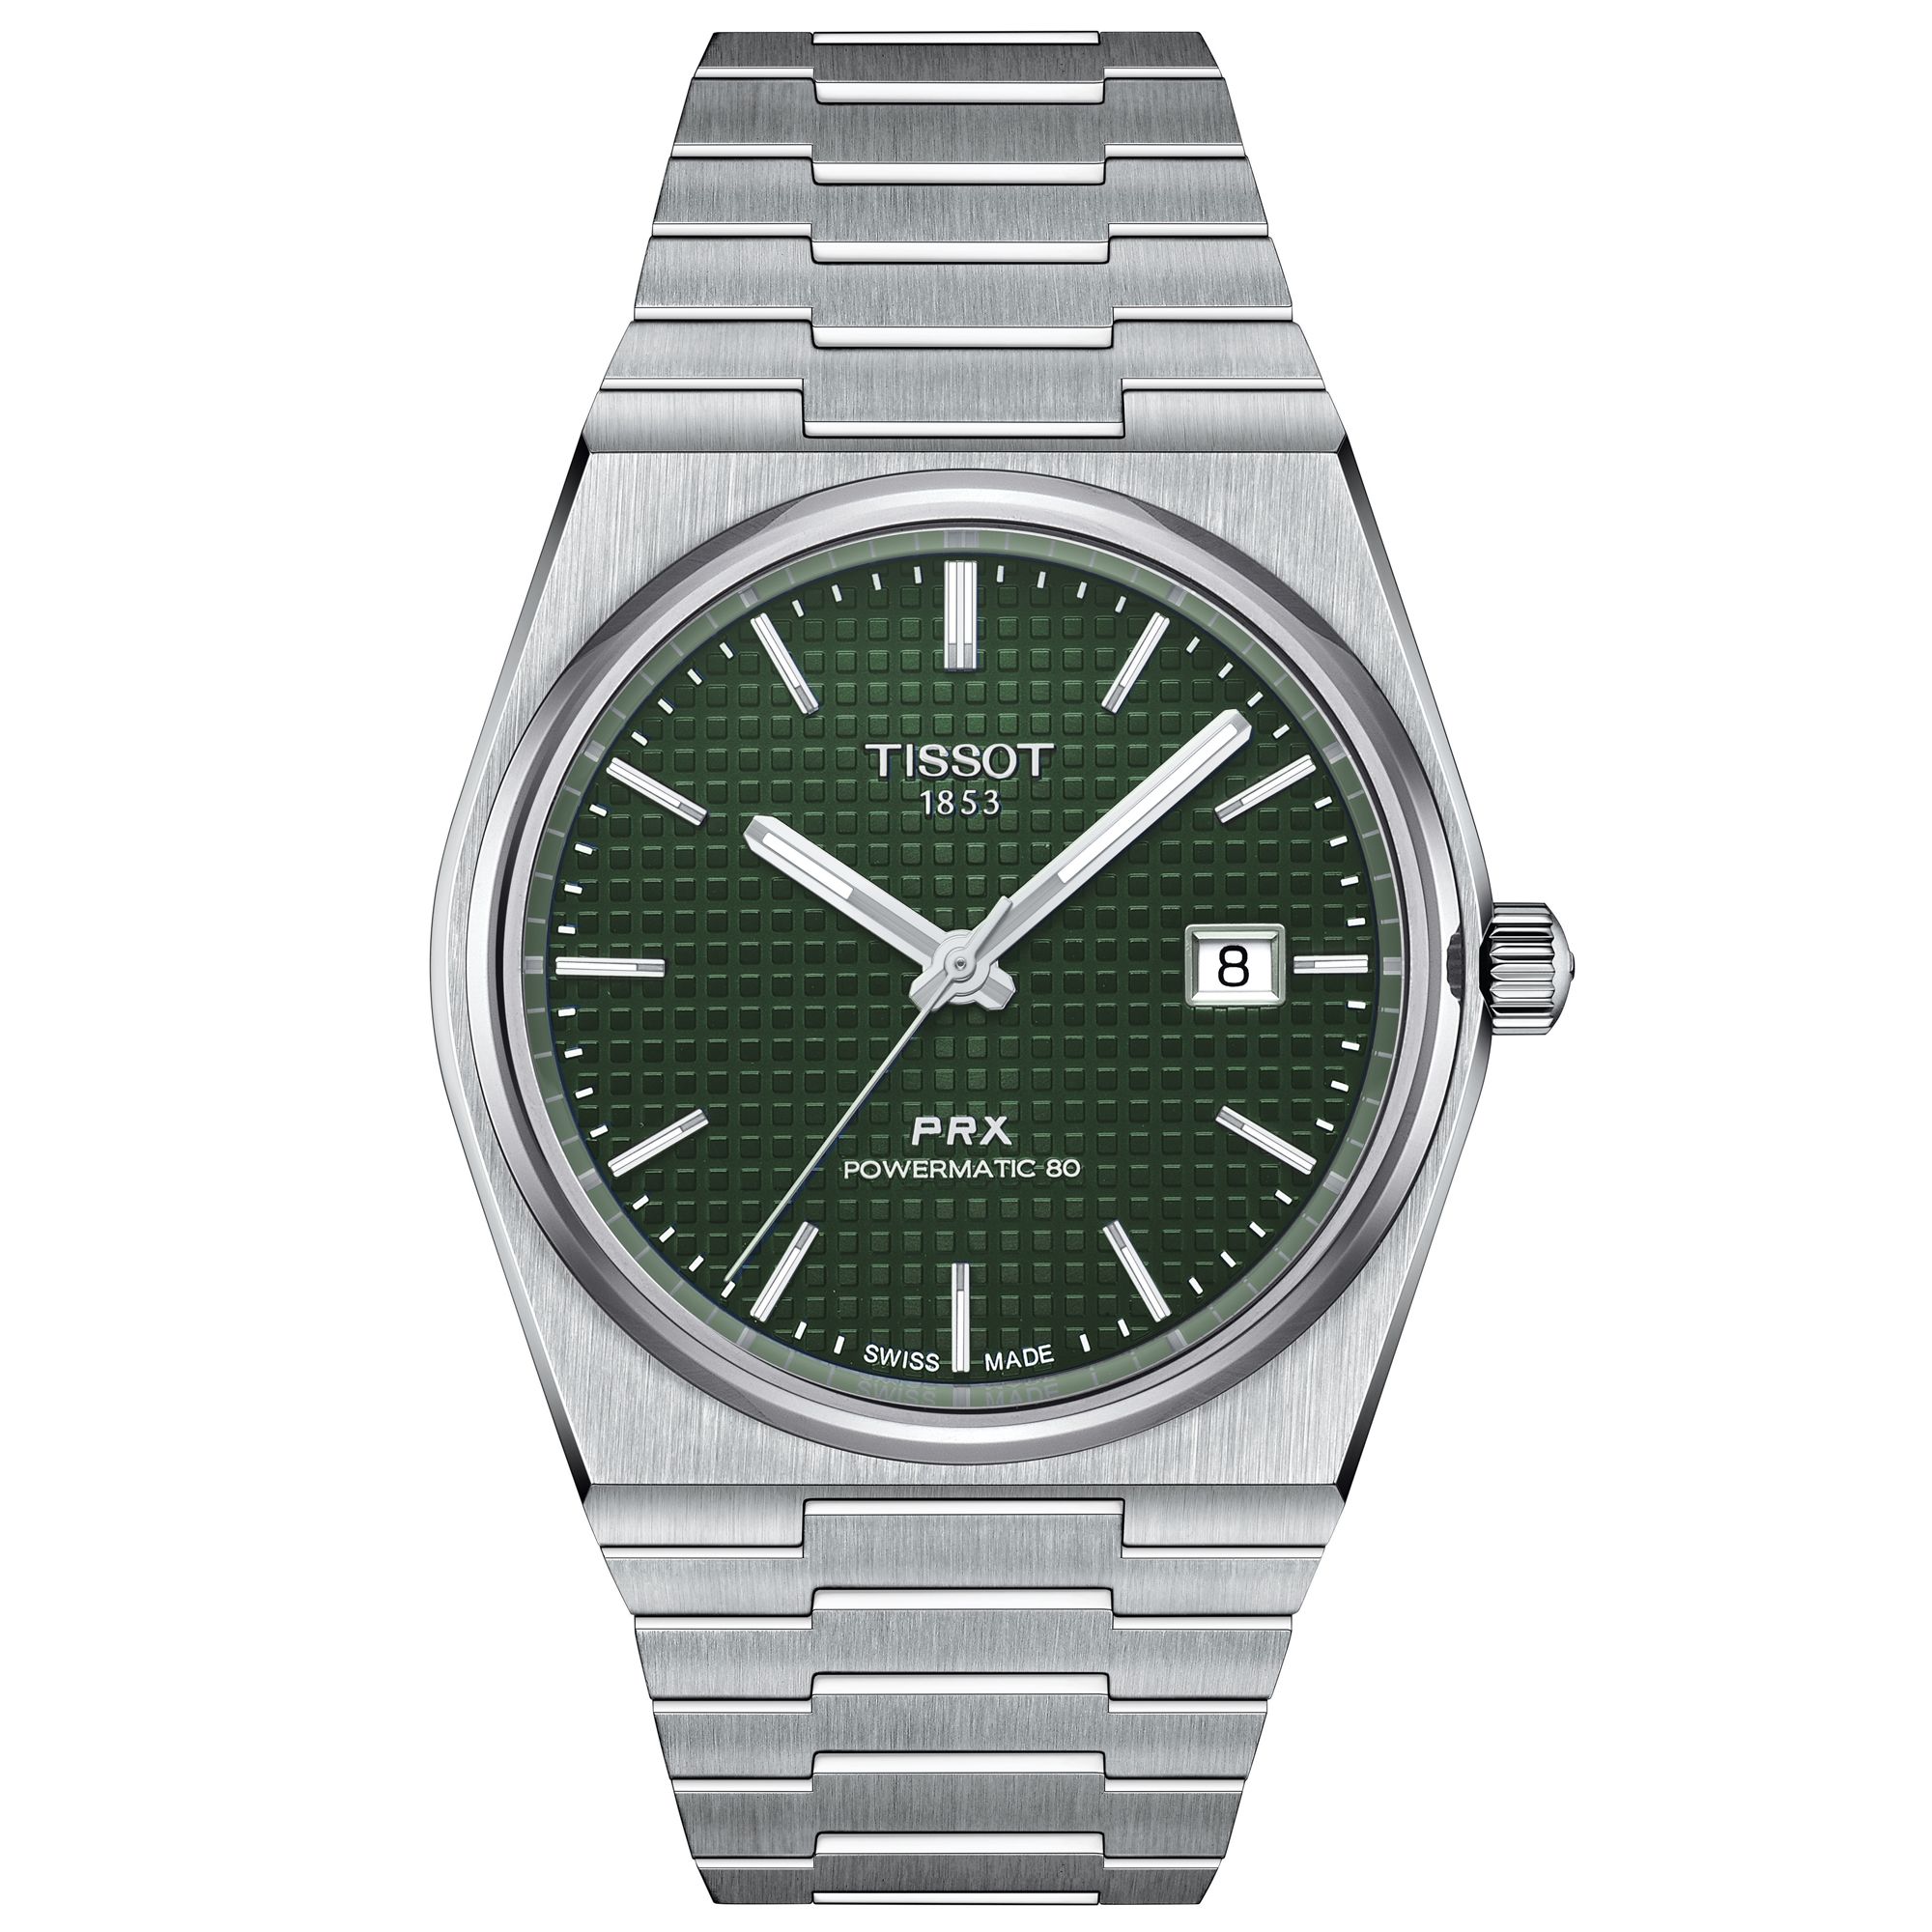 Tissot PRX Powermatic 80 Green Dial Stainless Steel Watch (T1374071109100)